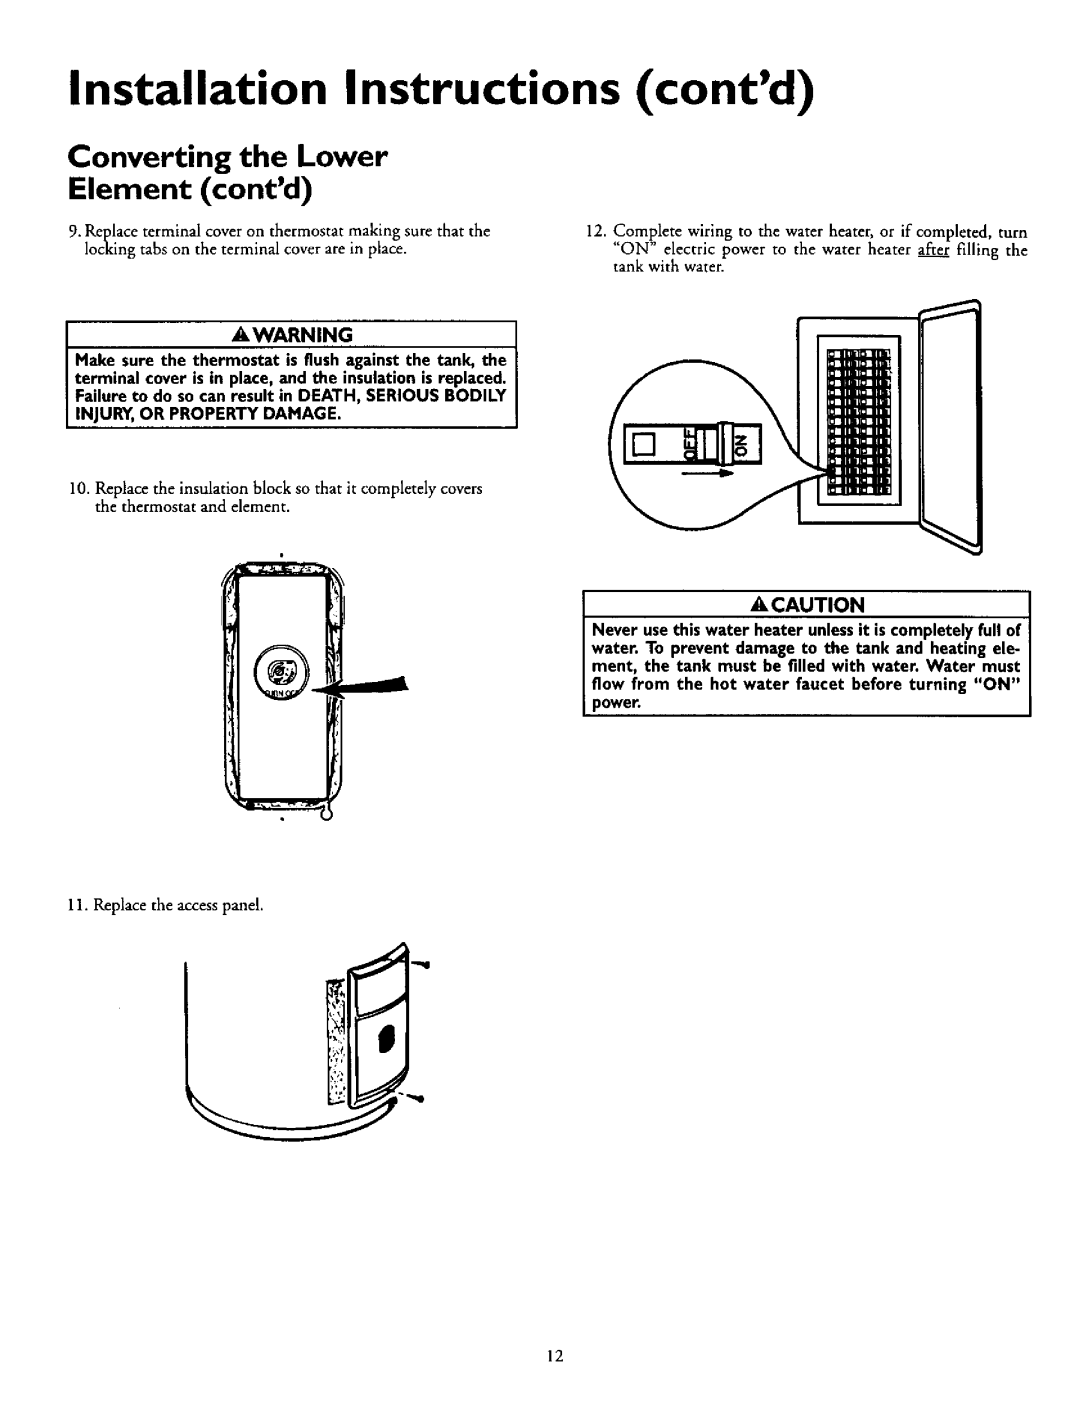 Kenmore 153.316153, 153.316554, 153.316555, 153.316455 Installation Instructions contd, Converting the Lower Element contd 